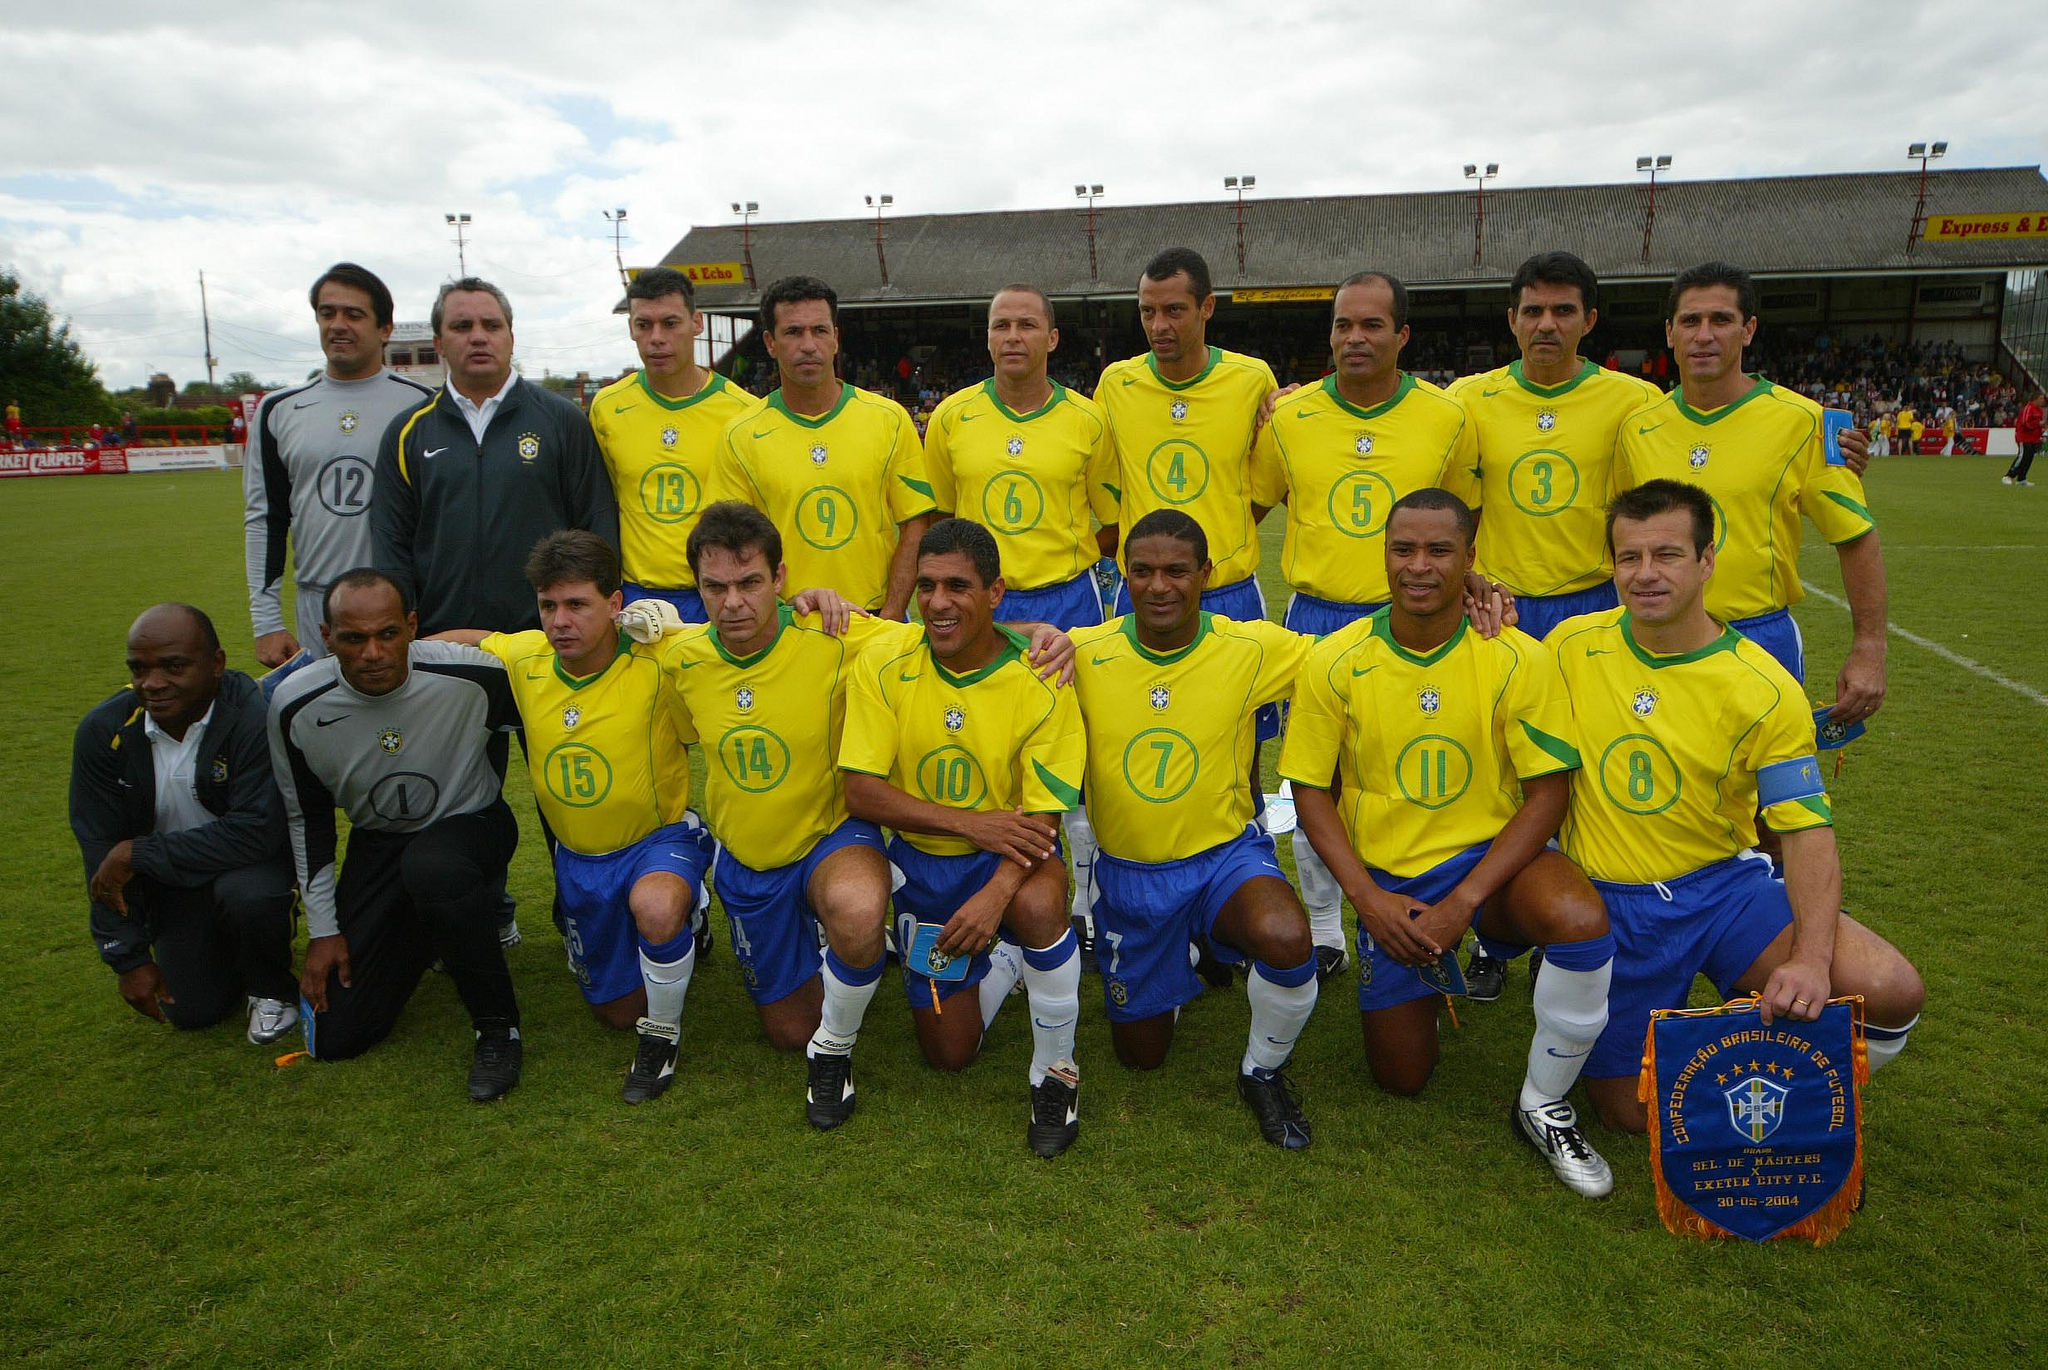 The Brazil masters team in 2004 at St James Park